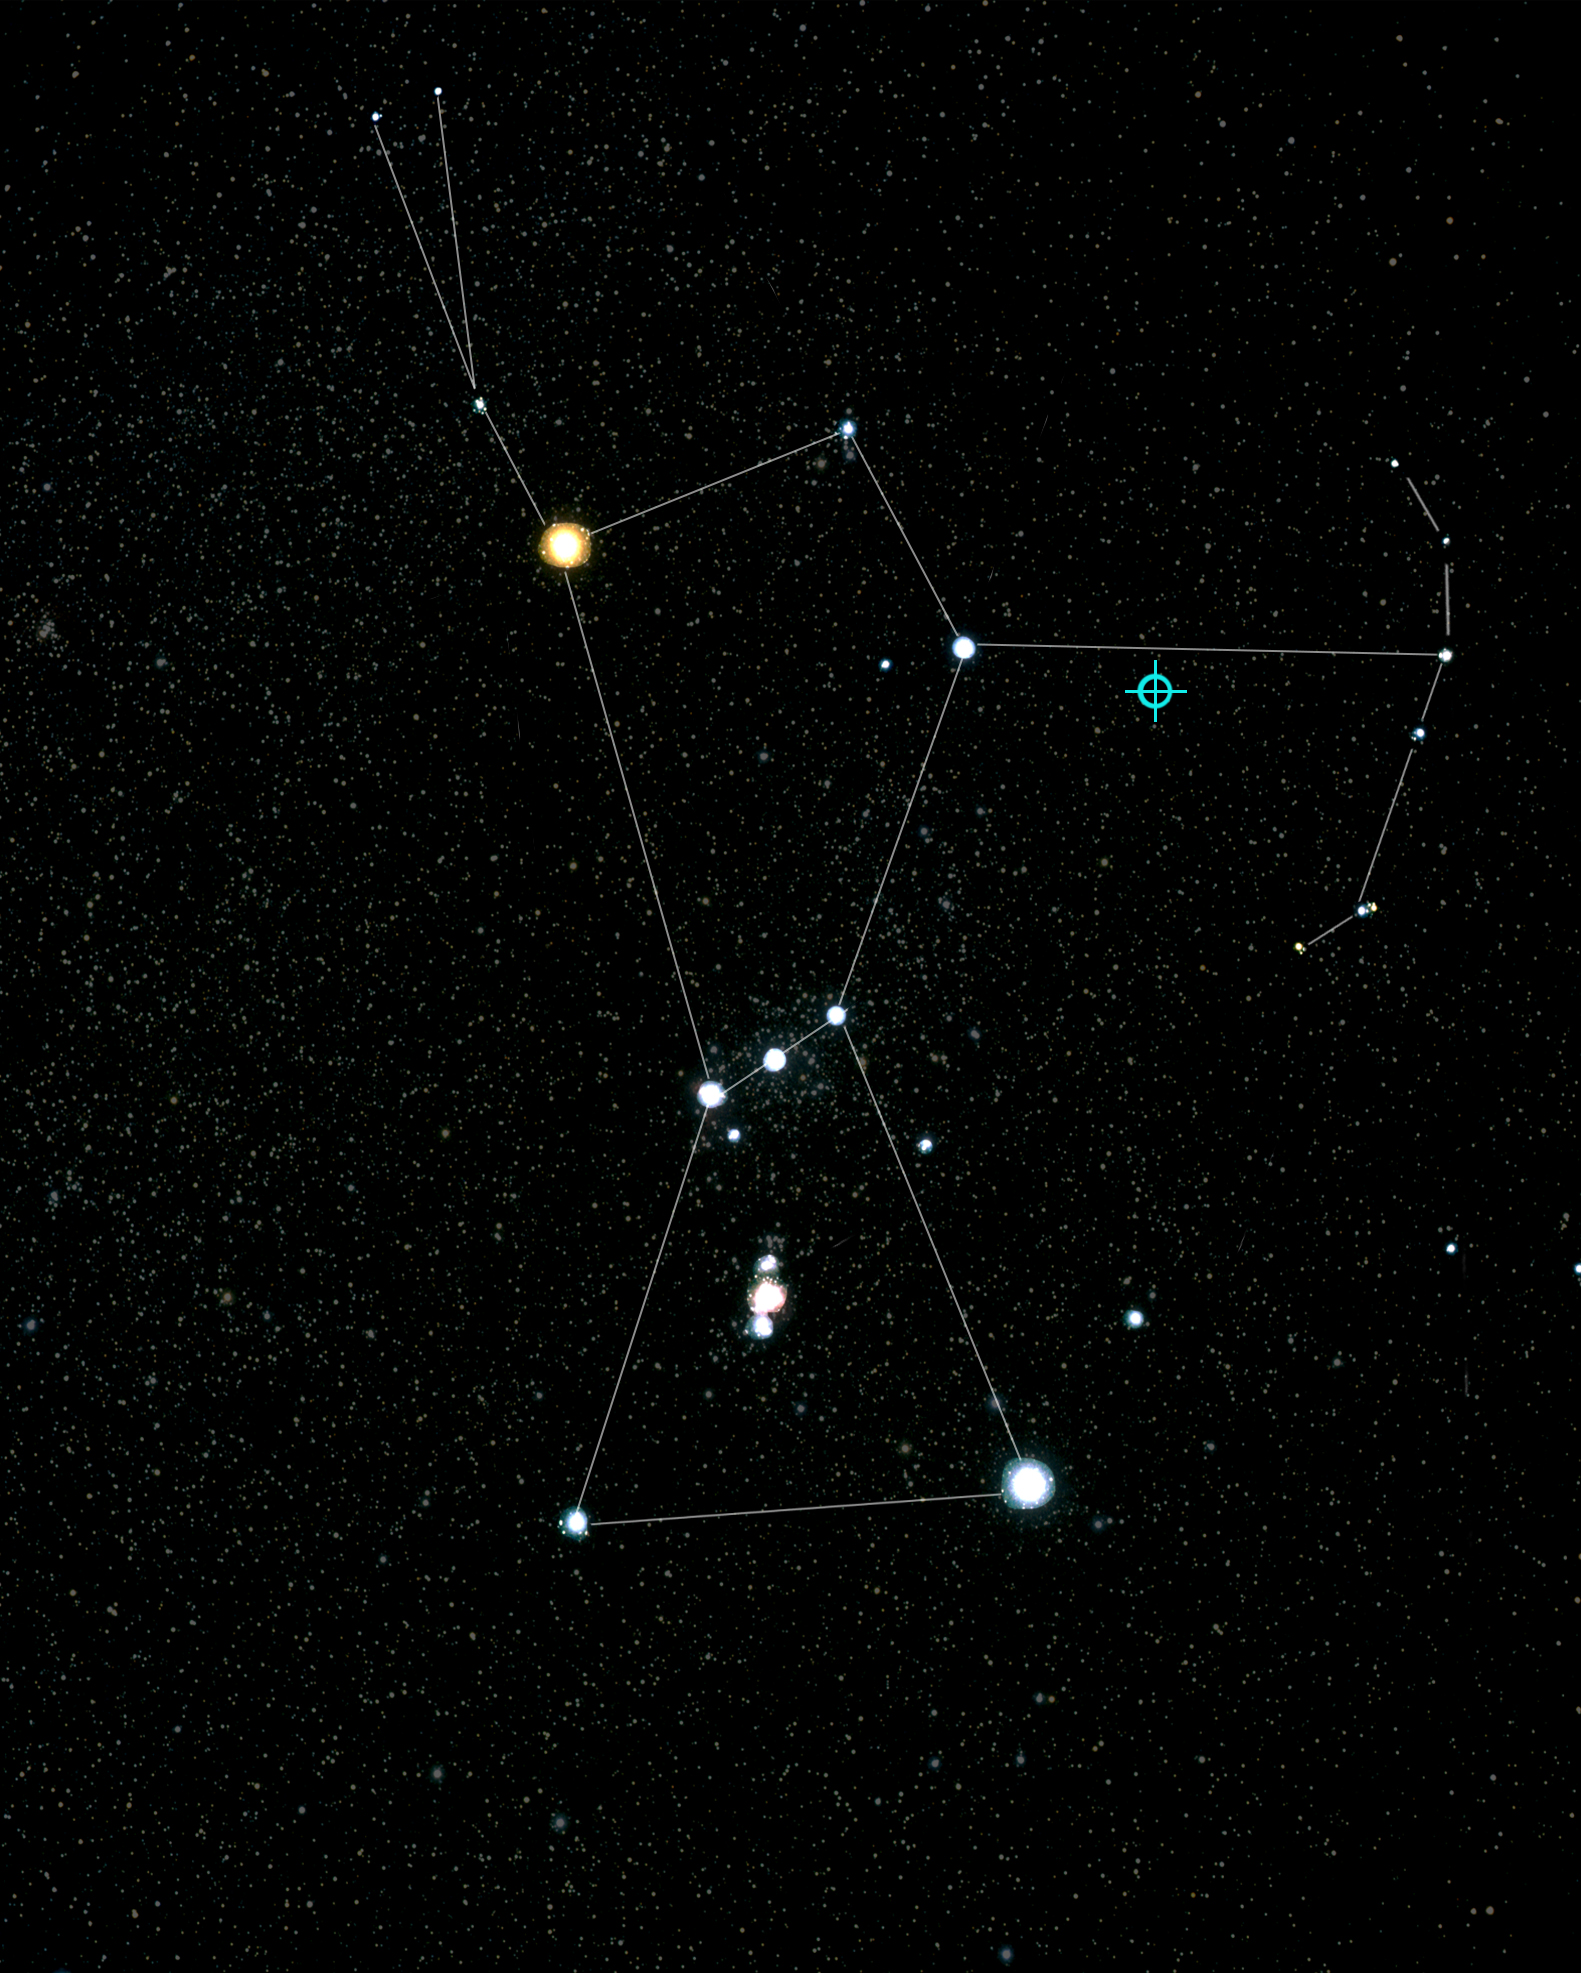 Blazar TXS 0506+056 and Orion in the sky